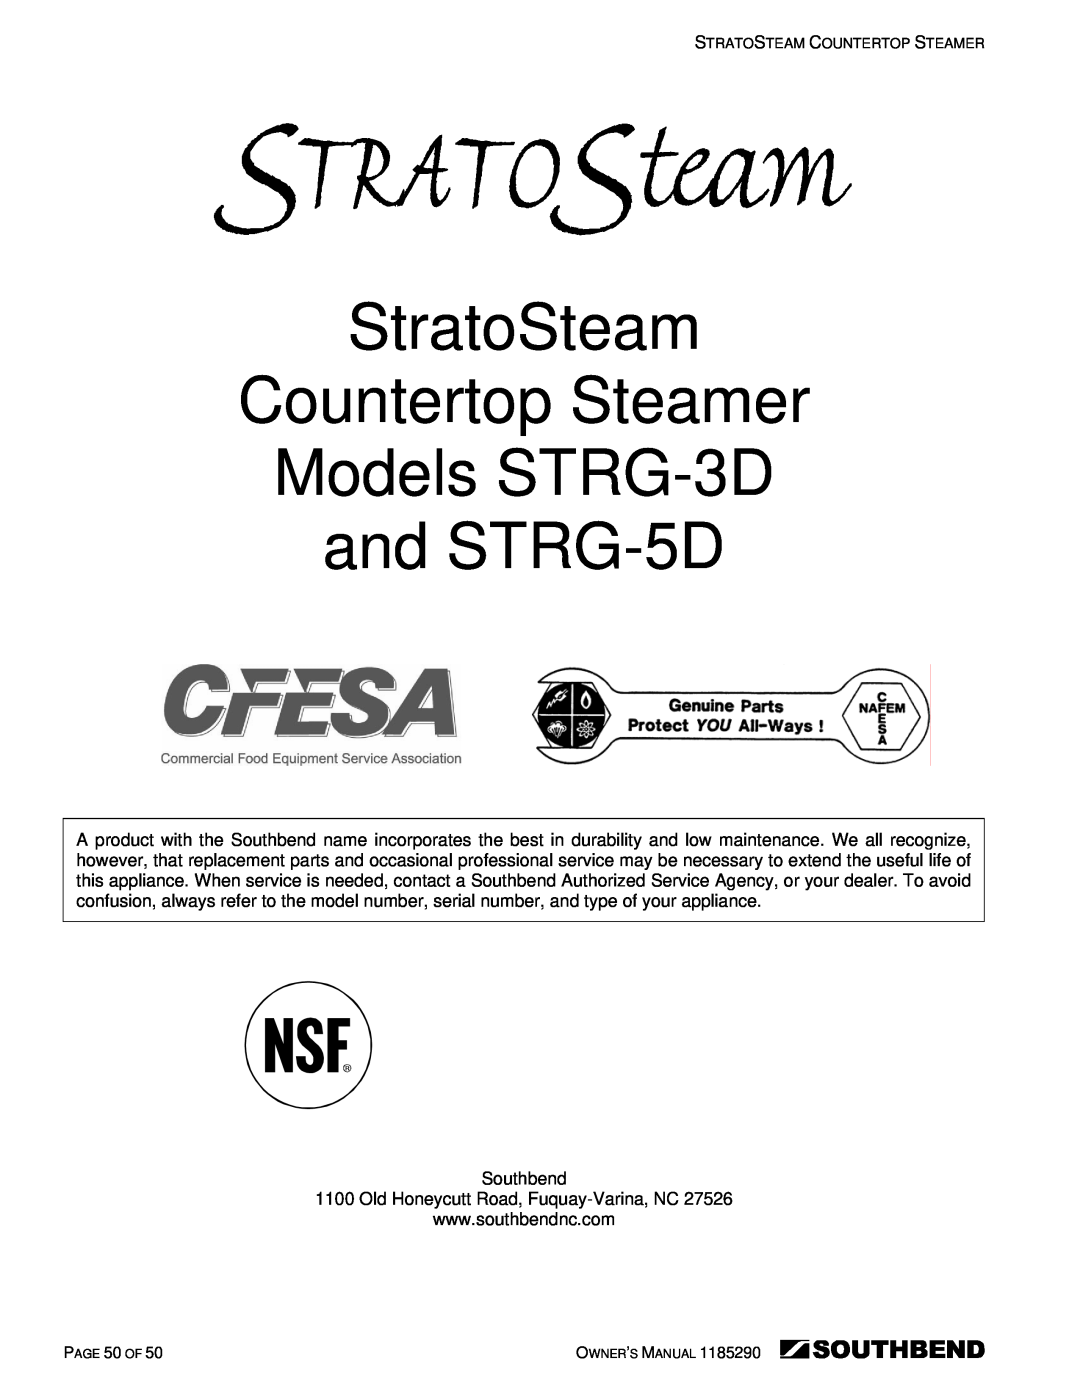 Southbend manual StratoSteam Countertop Steamer Models STRG-3D and STRG-5D 